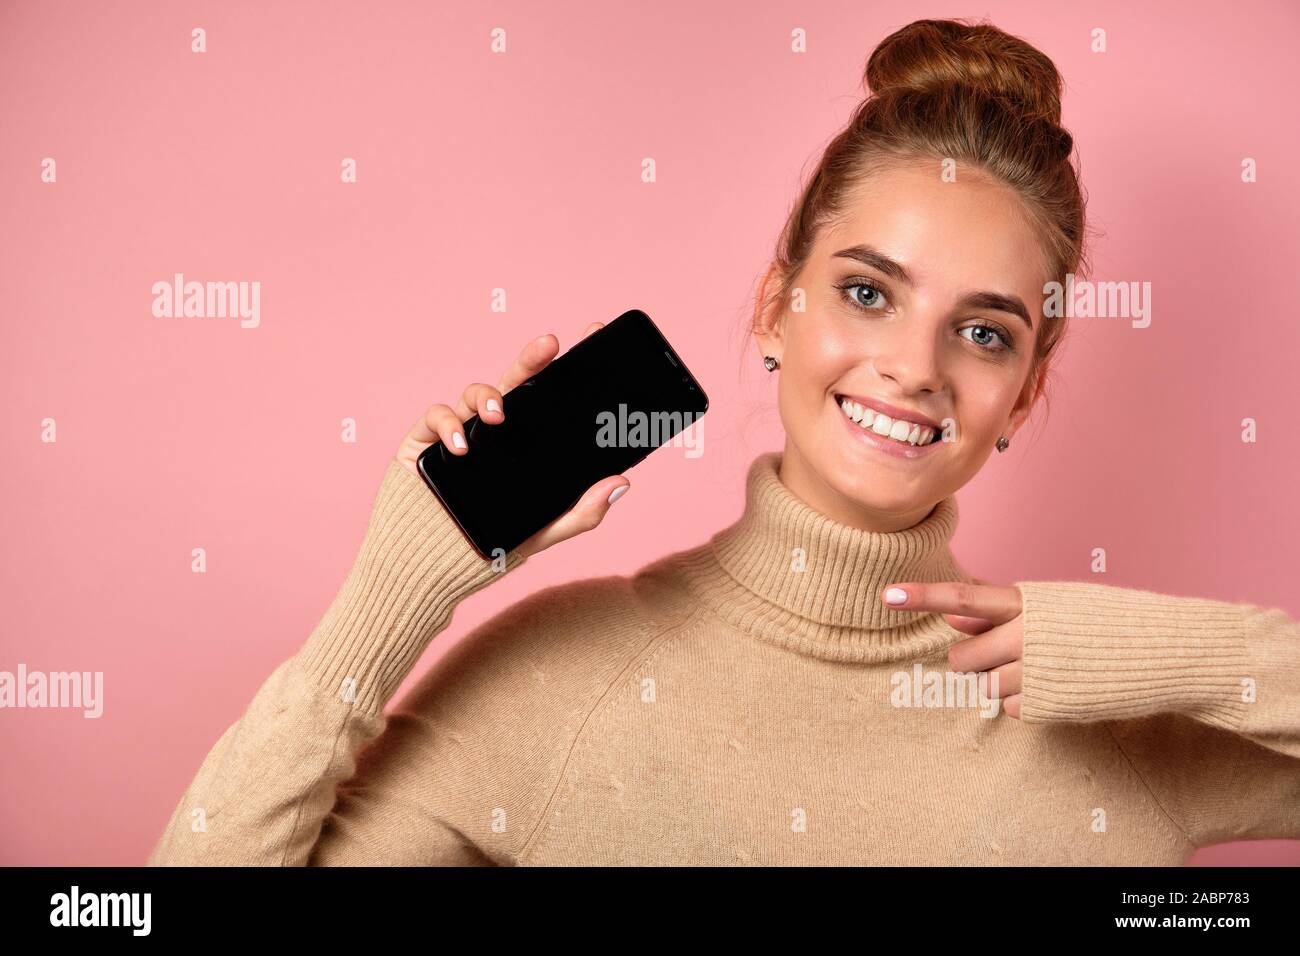 A girl with clean skin and a high bun joyfully points to the smartphone with her finger and looks at the frame. Stock Photo